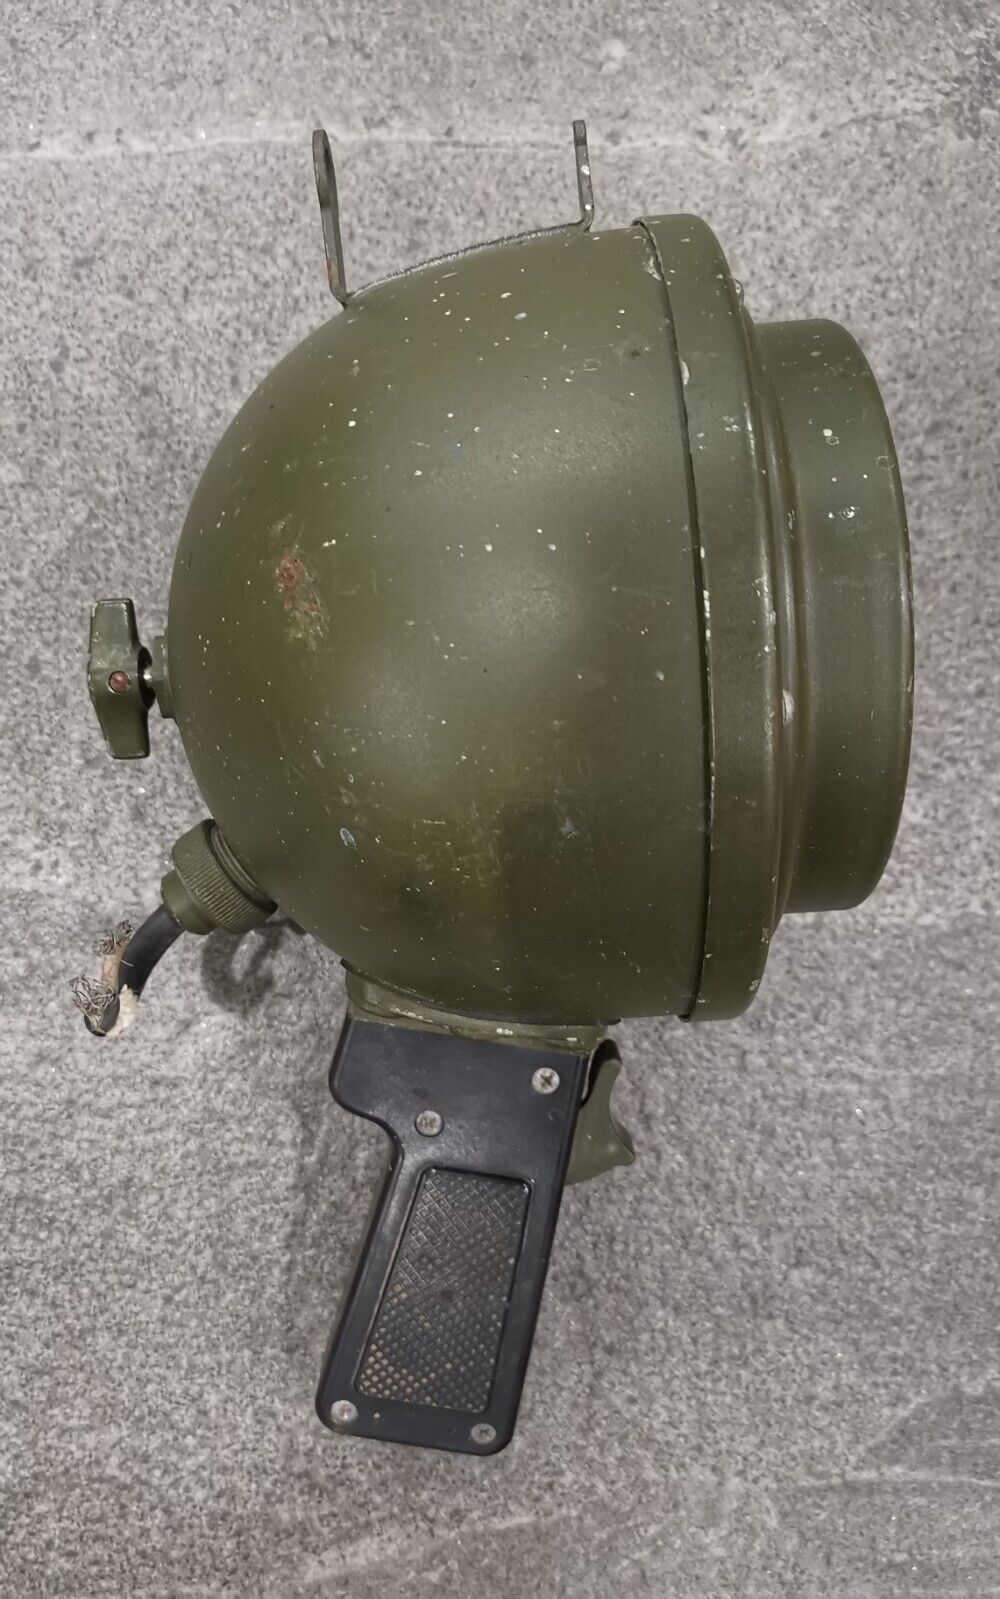 WWII Military, Grimes G-3160 Signal Lamp. 13V NATO 01903-S6600-658219